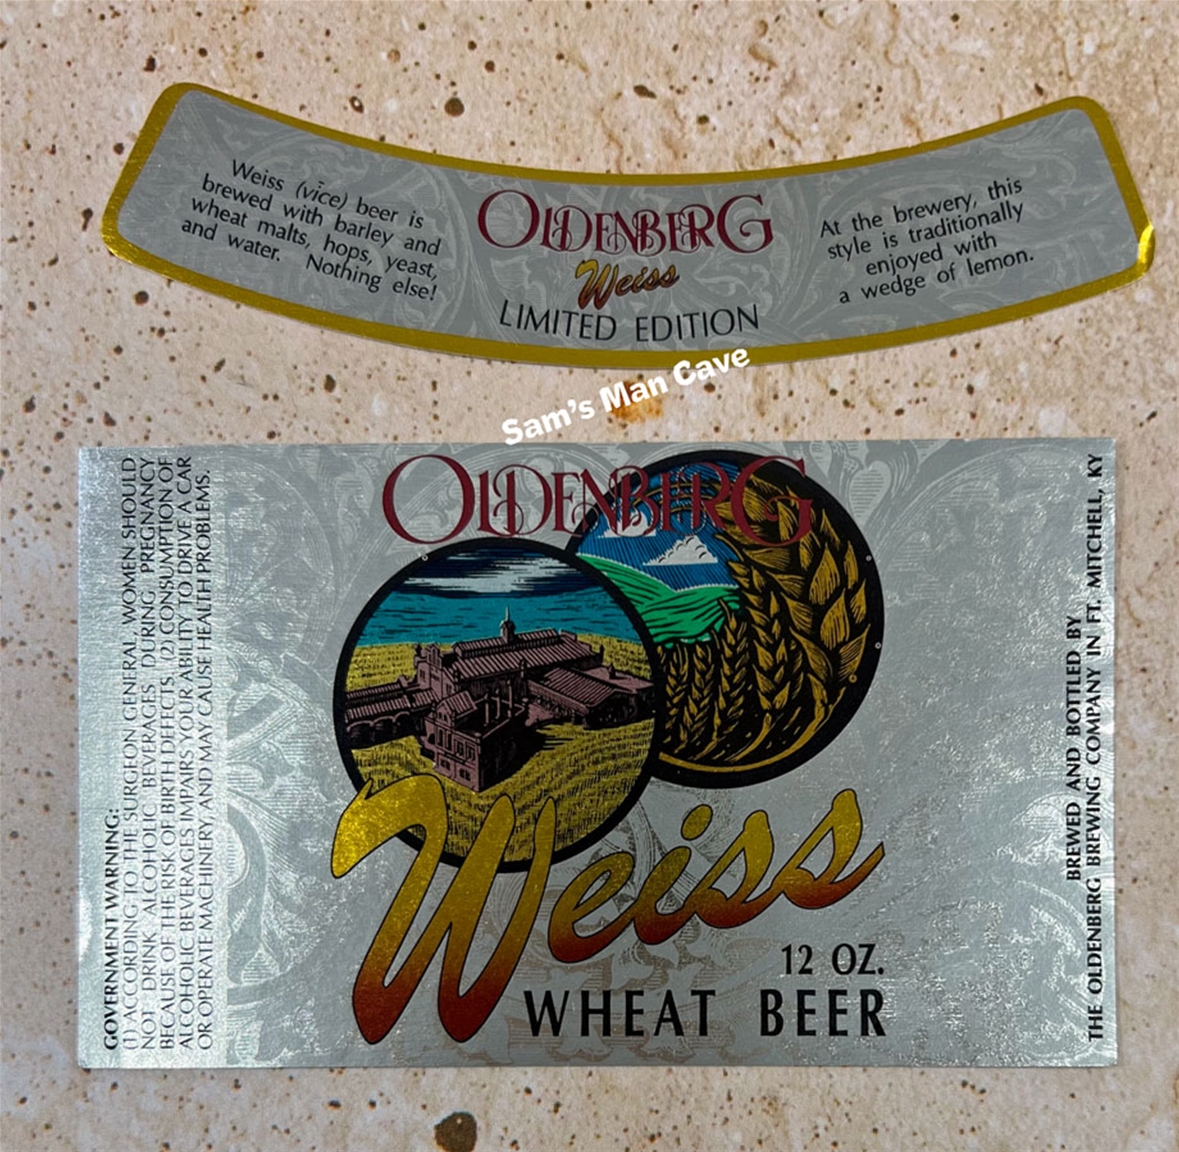 Oldenberg Weiss Label with neck